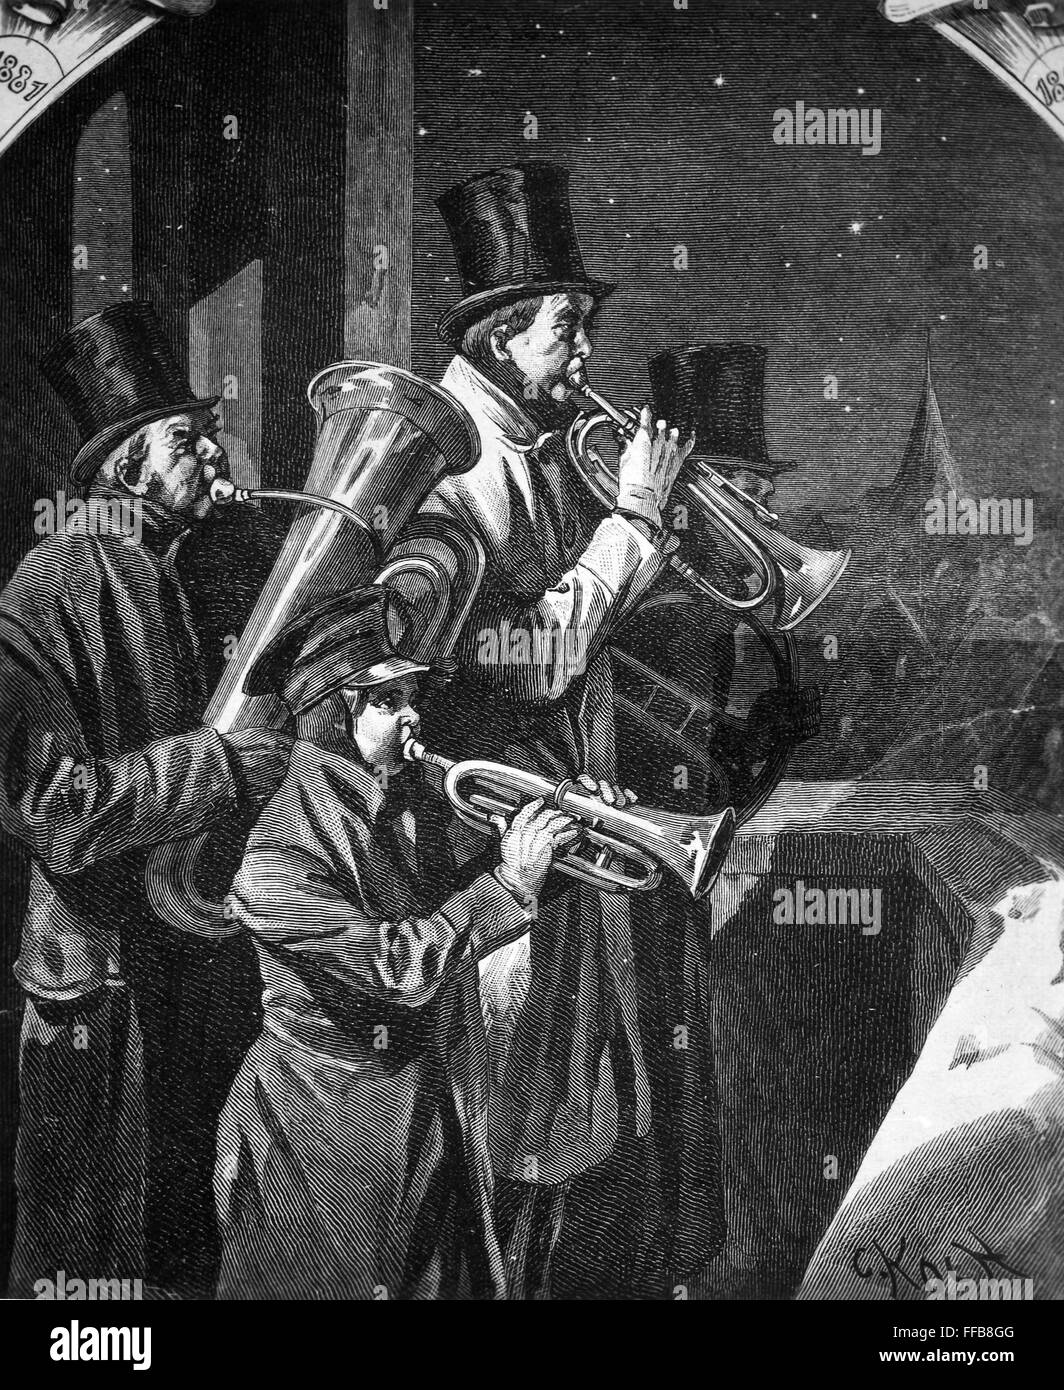 NEW YEAR'S. /nA Brass Band serenading the New Year on a rooftop. Wood engraving, 1882. Stock Photo